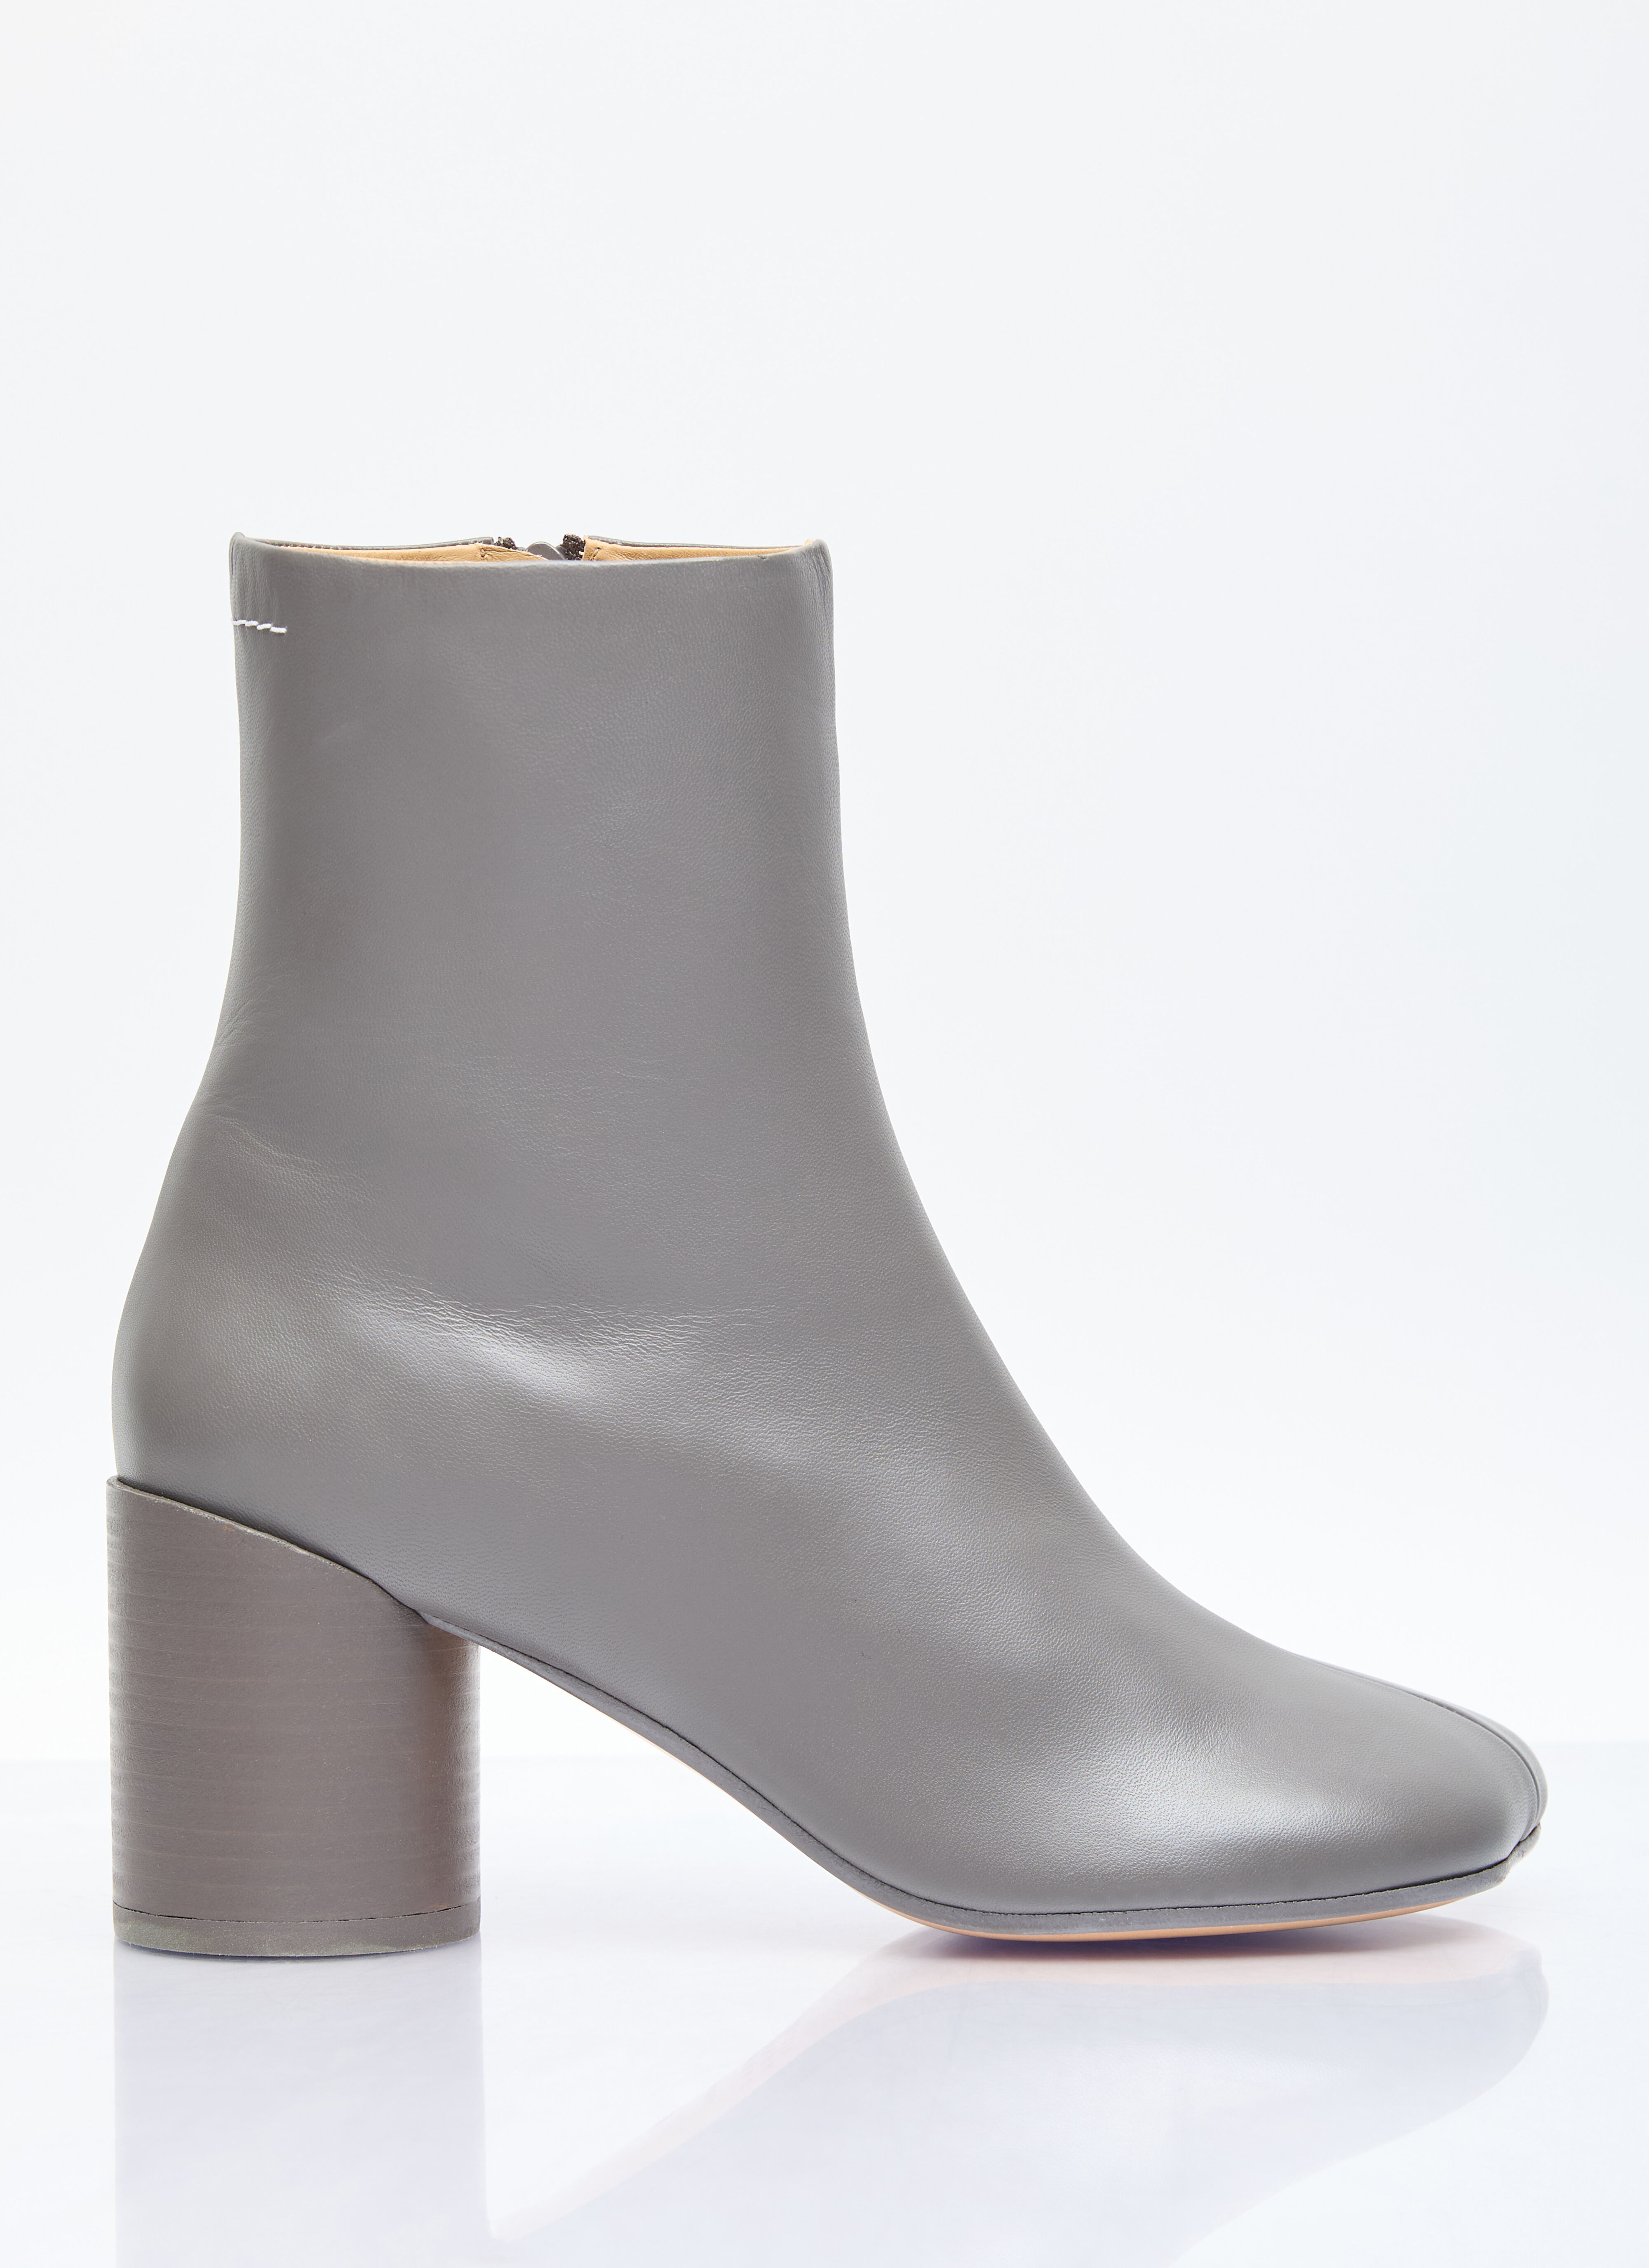 Vivienne Westwood Anatomic Ankle Boots 白色 vvw0255056